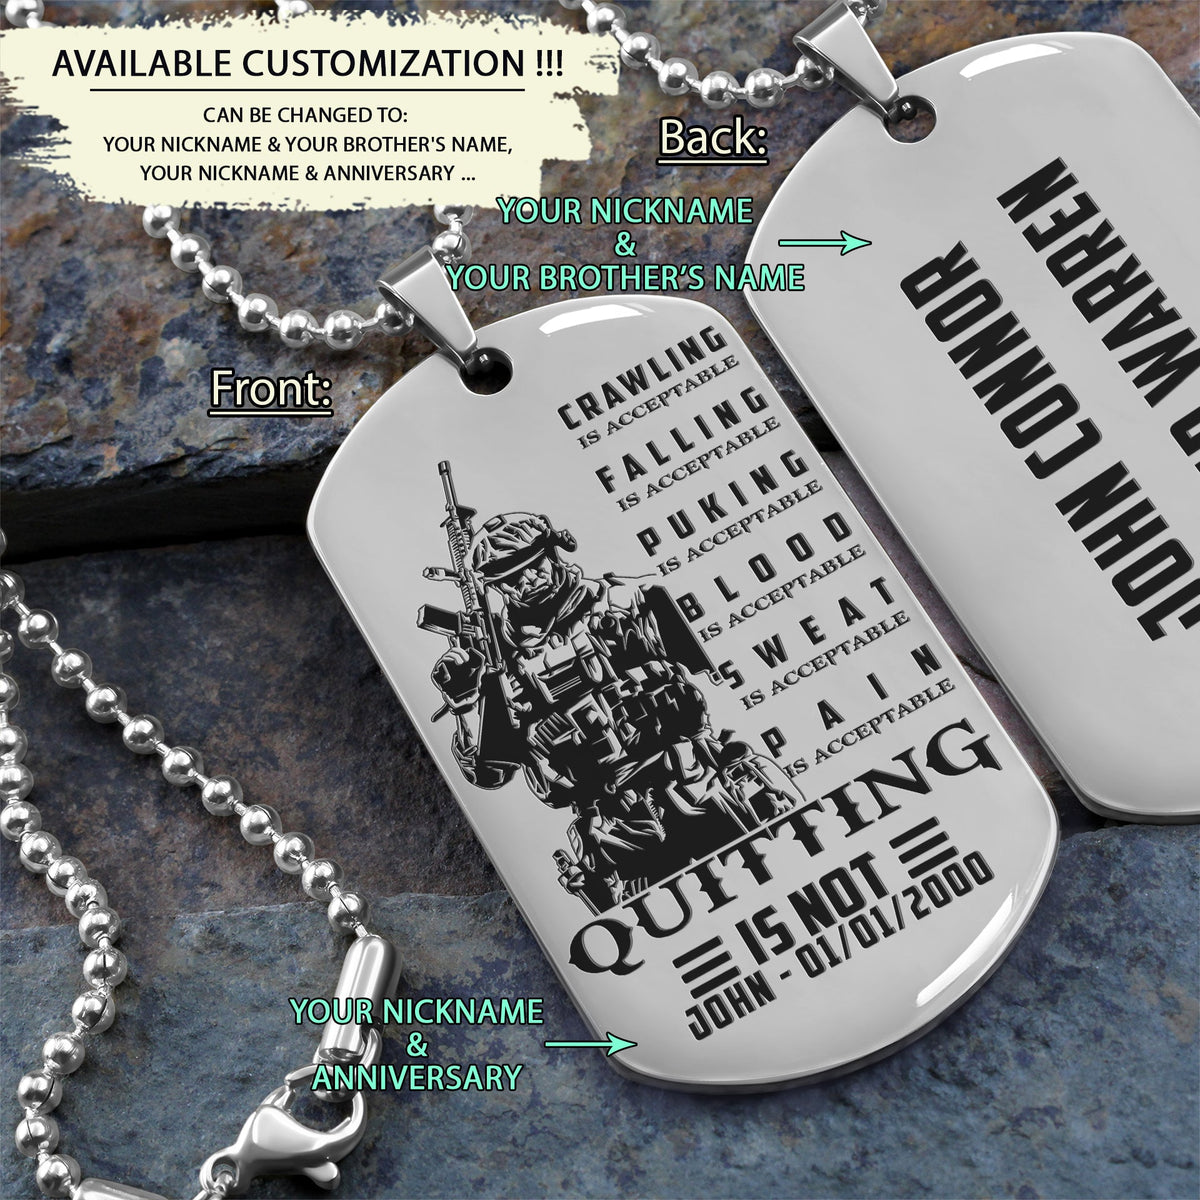 SDD019 - Quitting Is Not - Soldier Dog Tag - Engrave Silver Dog Tag